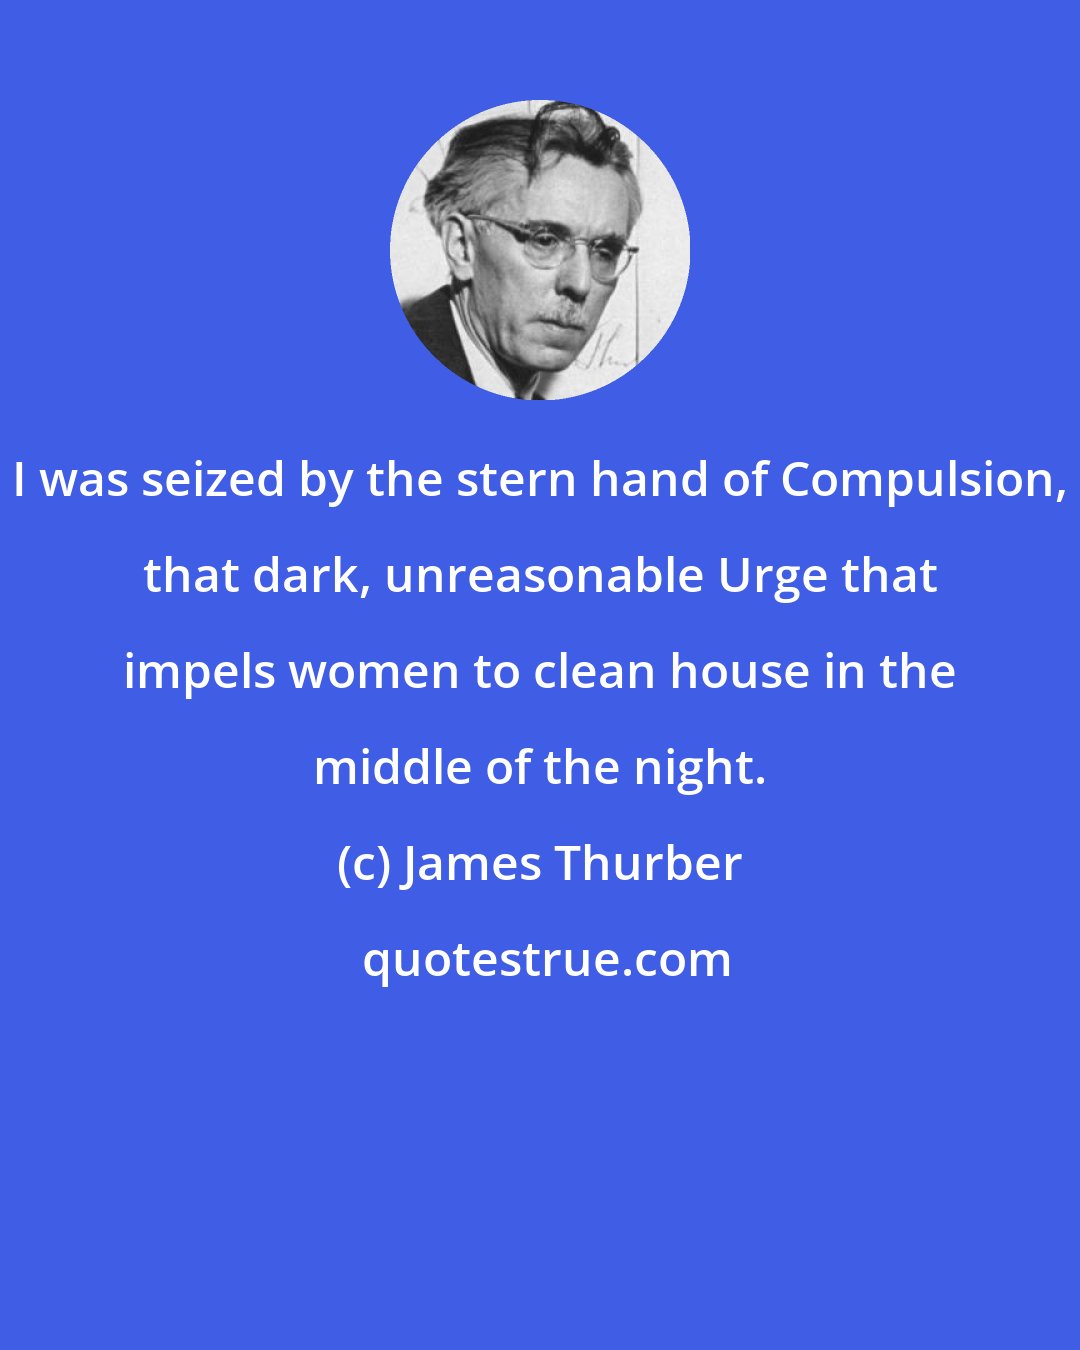 James Thurber: I was seized by the stern hand of Compulsion, that dark, unreasonable Urge that impels women to clean house in the middle of the night.